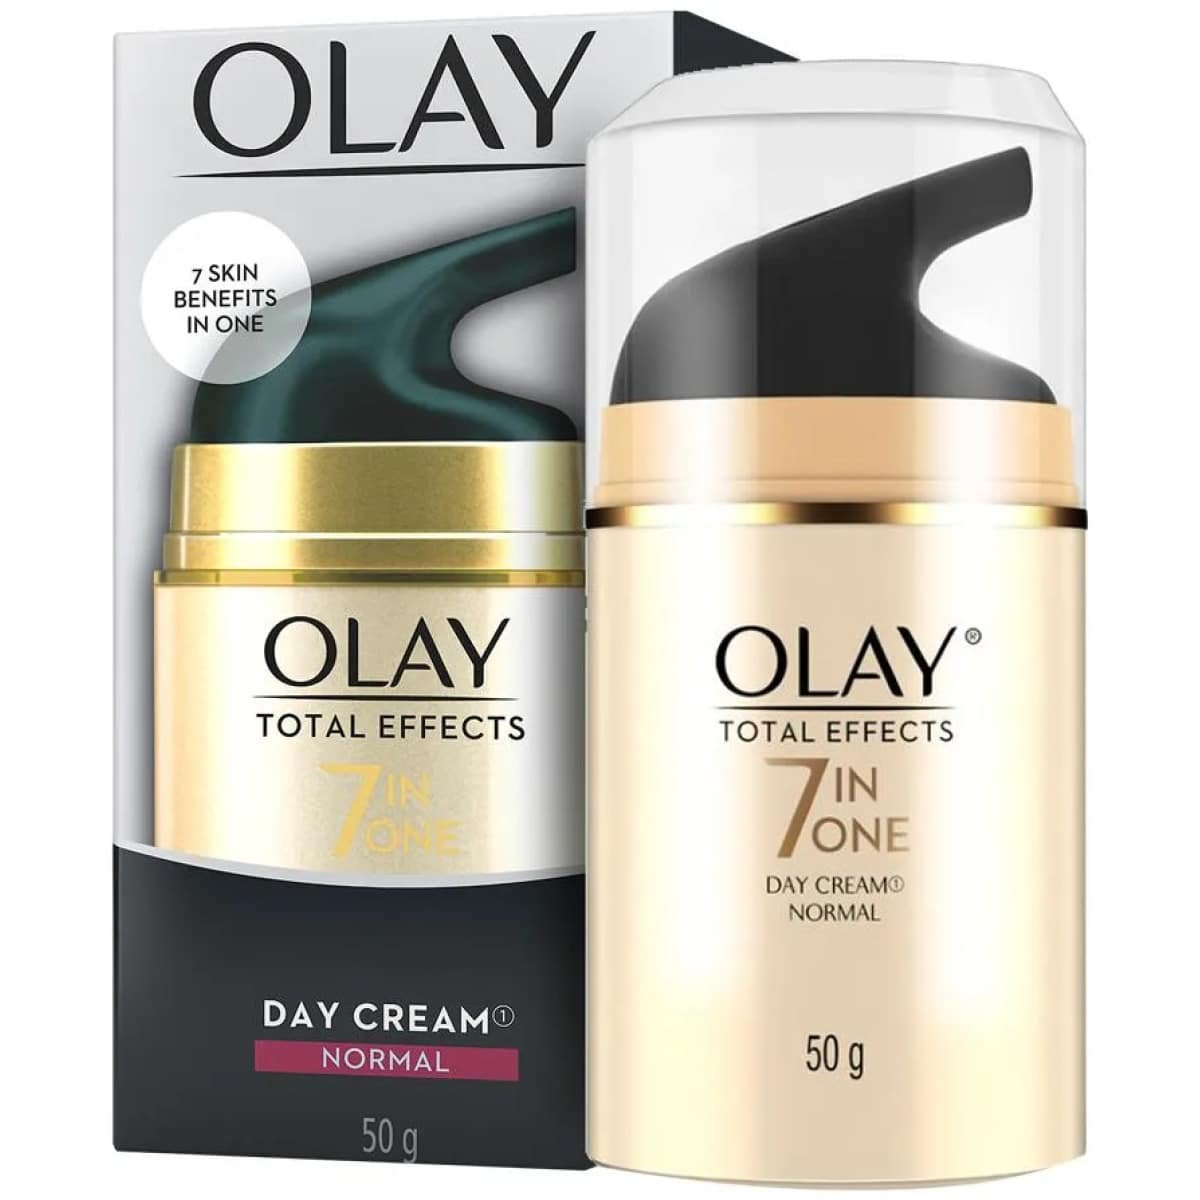 Olay Total Effects 7 in 1, Day Cream Normal 50 g